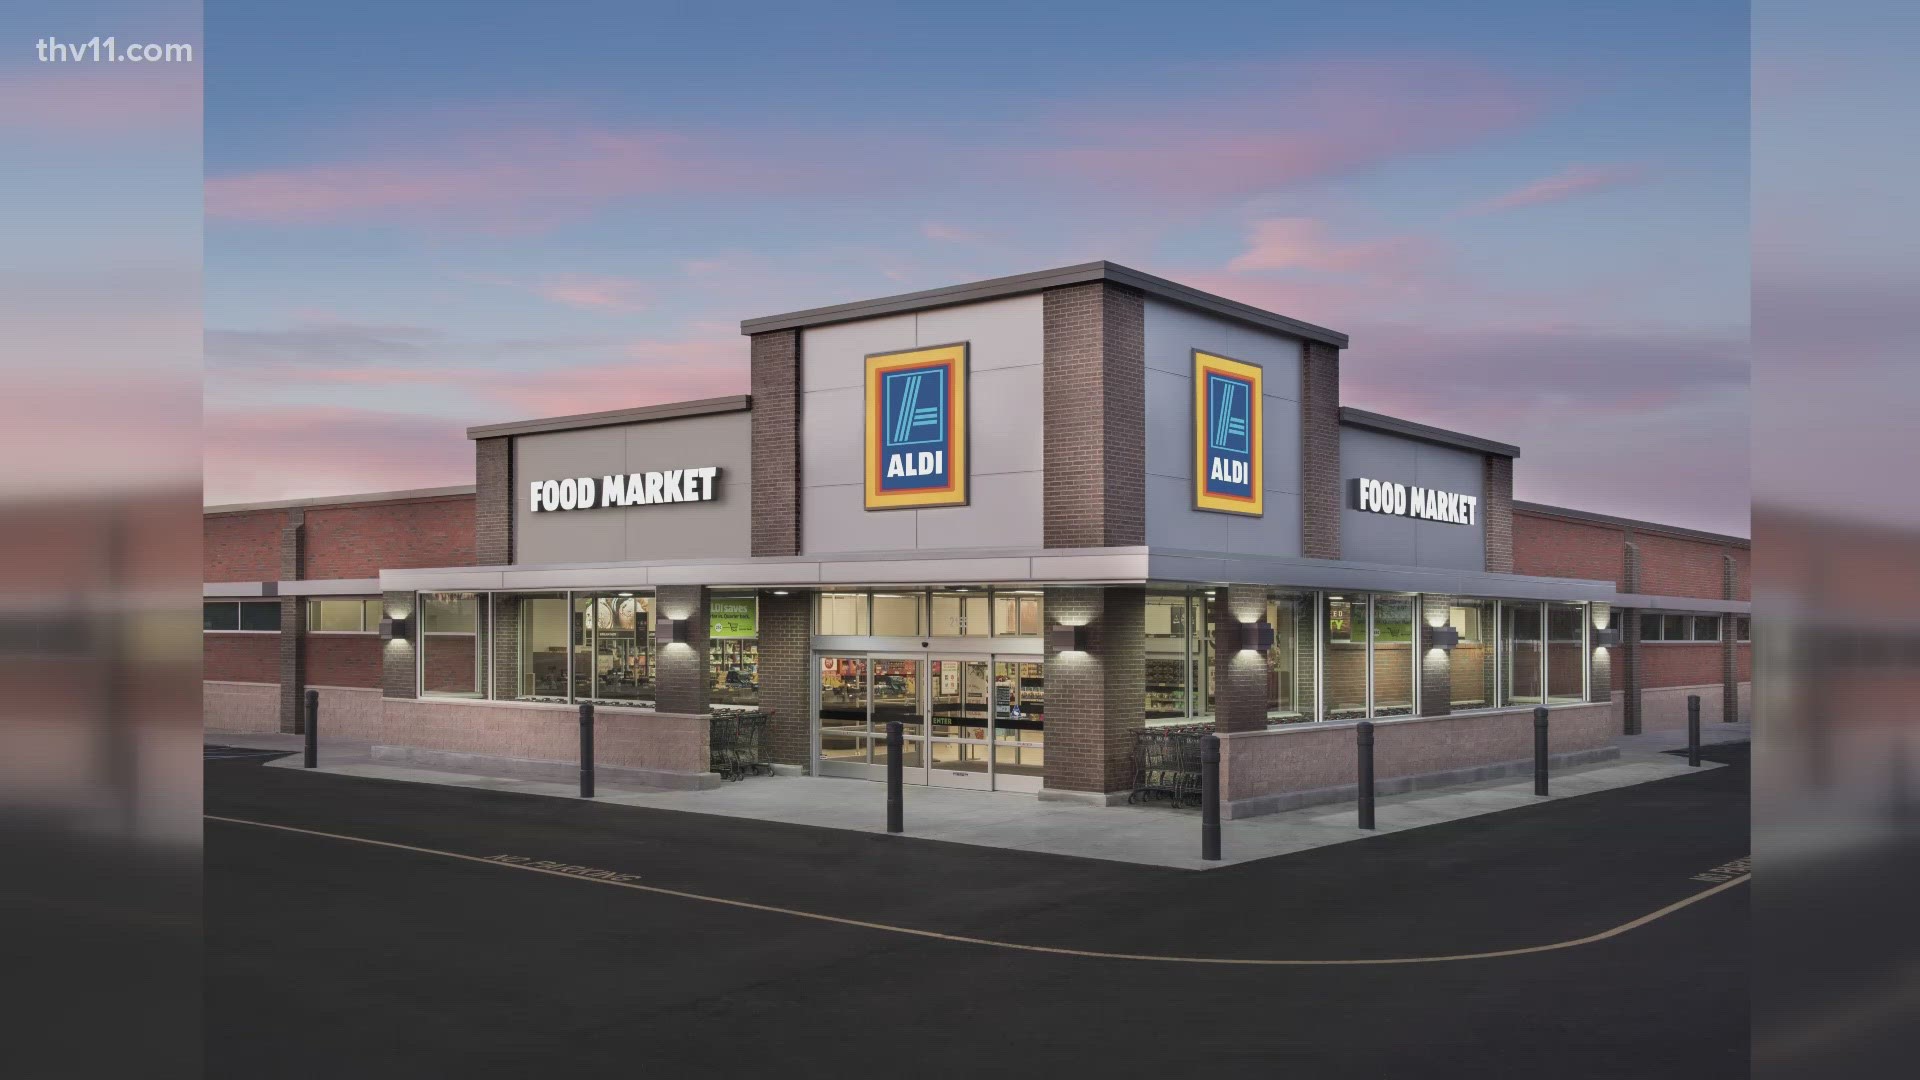 A new Aldi Food Market is coming to Little Rock, taking the place of Bed, Bath, and Beyond on Chenal Parkway.